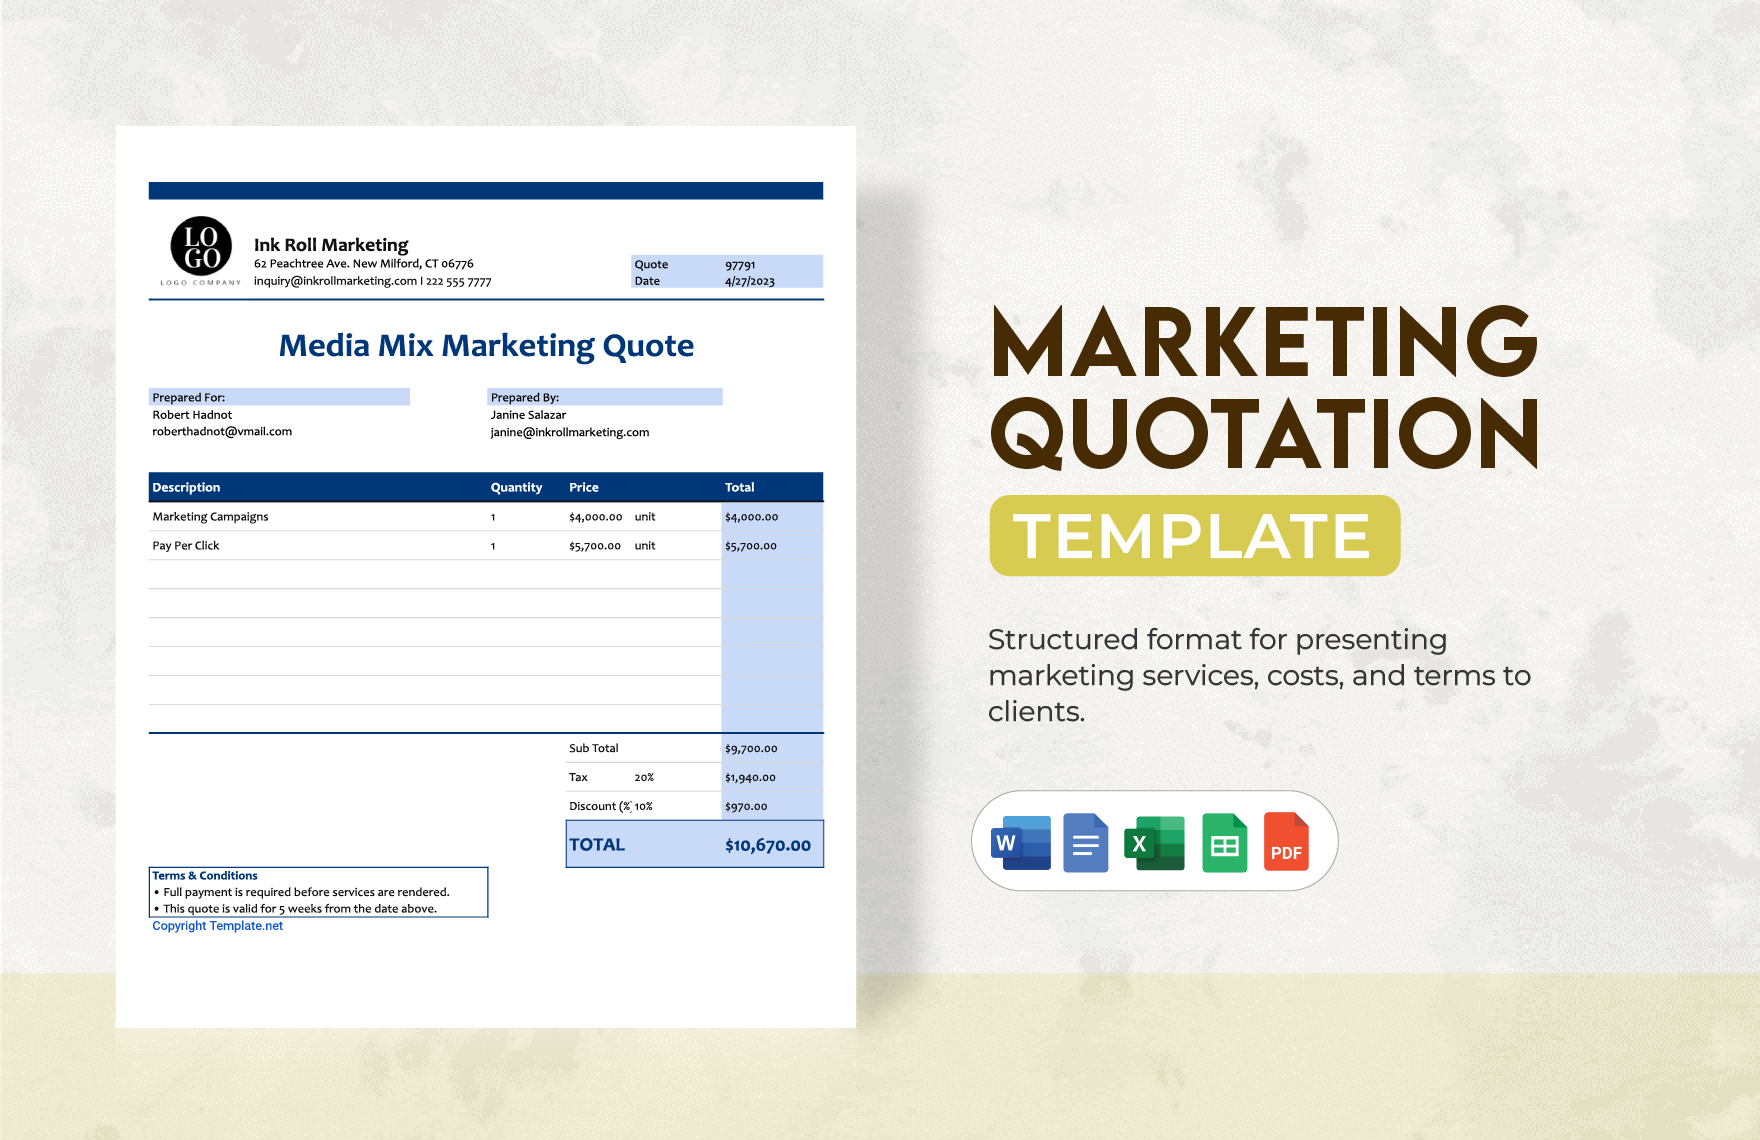 Marketing Quotation Template in Word, Google Docs, Excel, PDF, Google Sheets